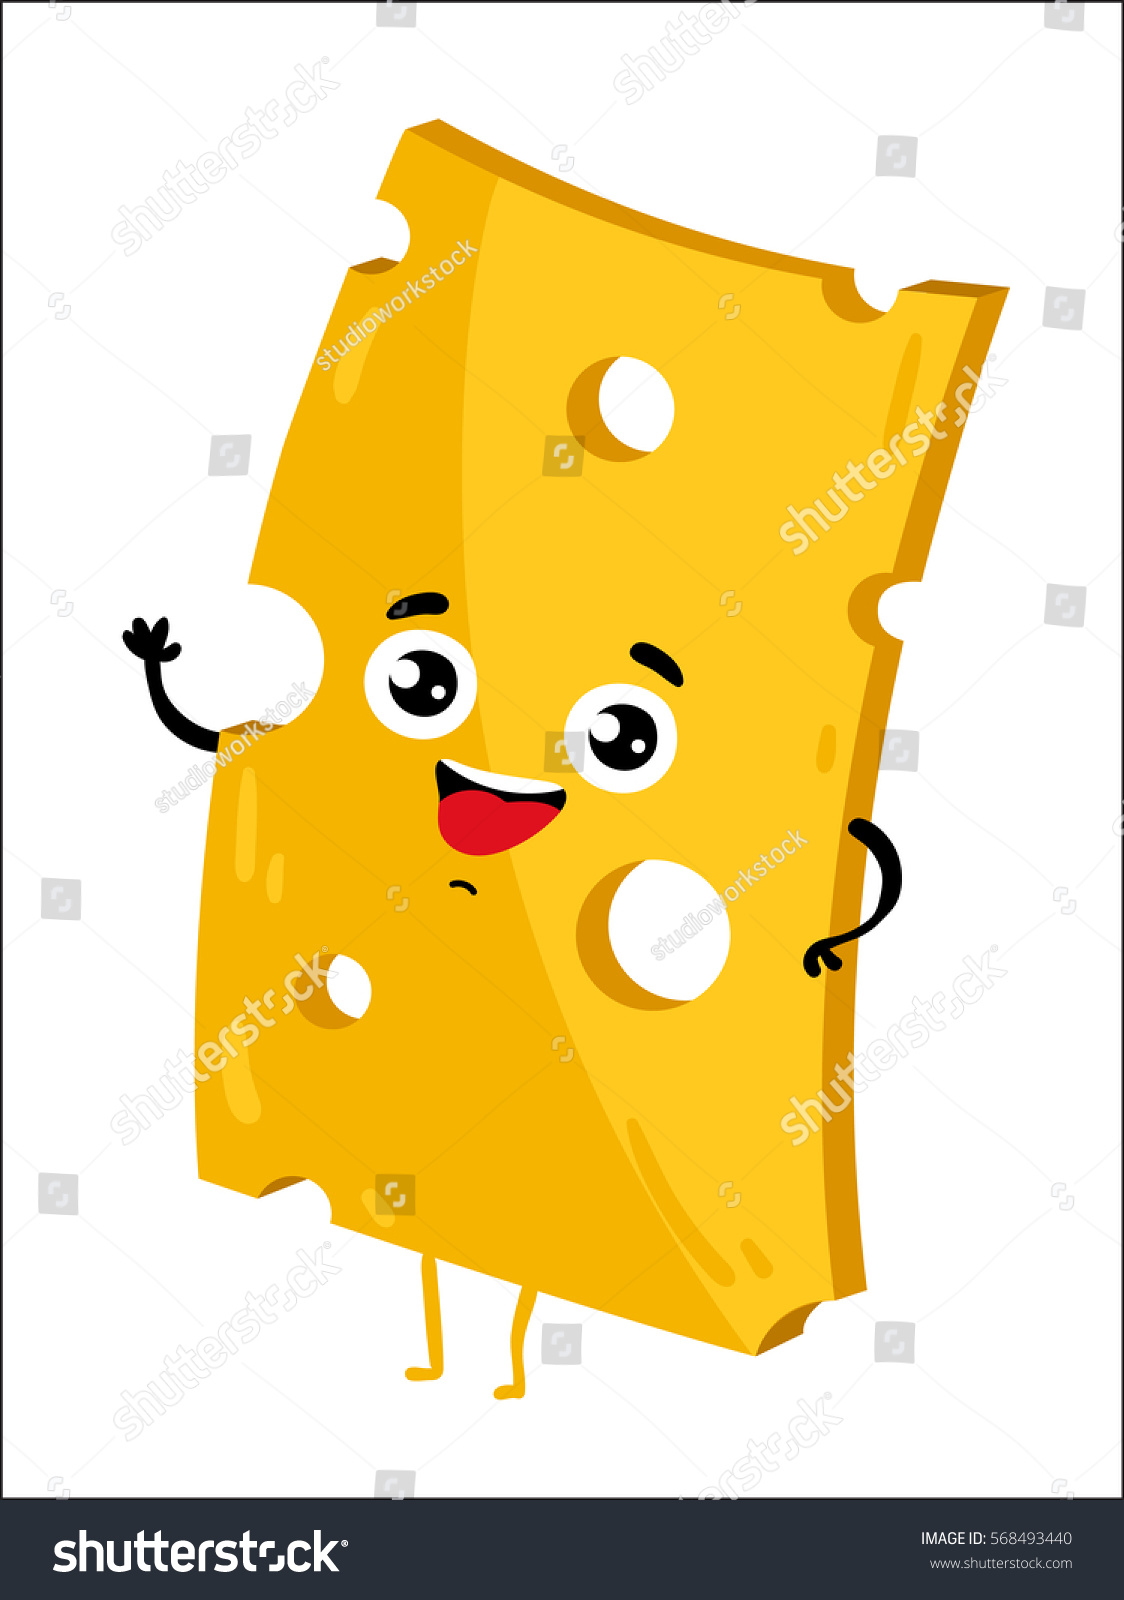 SVG of Cute cheese slice cartoon character isolated on white background vector illustration. Funny dairy product emoticon face icon. Happy smile cartoon face milk food, comical cheddar cheese mascot symbol svg